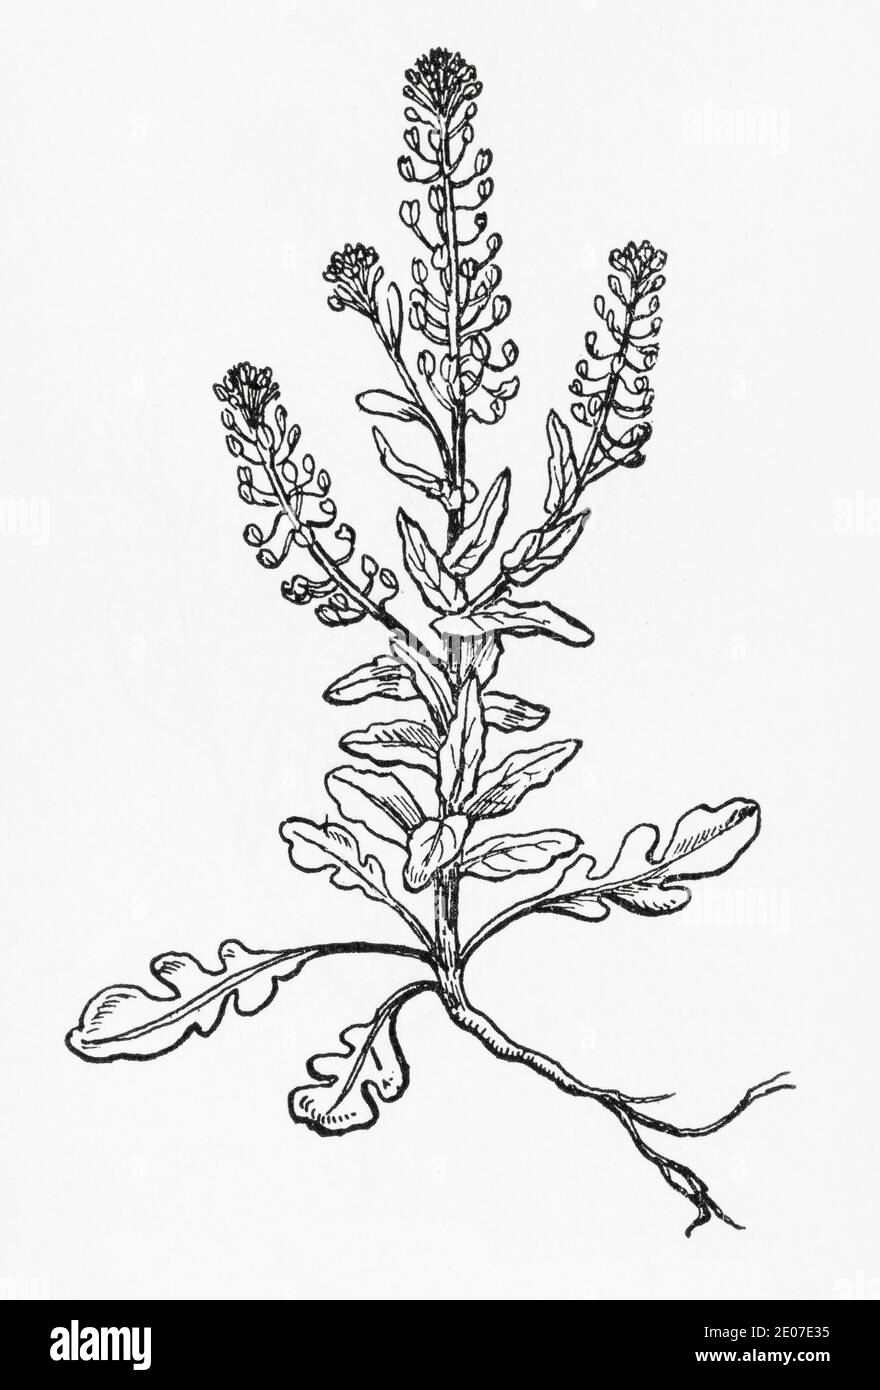 Old botanical illustration engraving of Narrow-leaved Pepperwort / Lepidium ruderale. Traditional medicinal herbal plant. See Notes Stock Photo